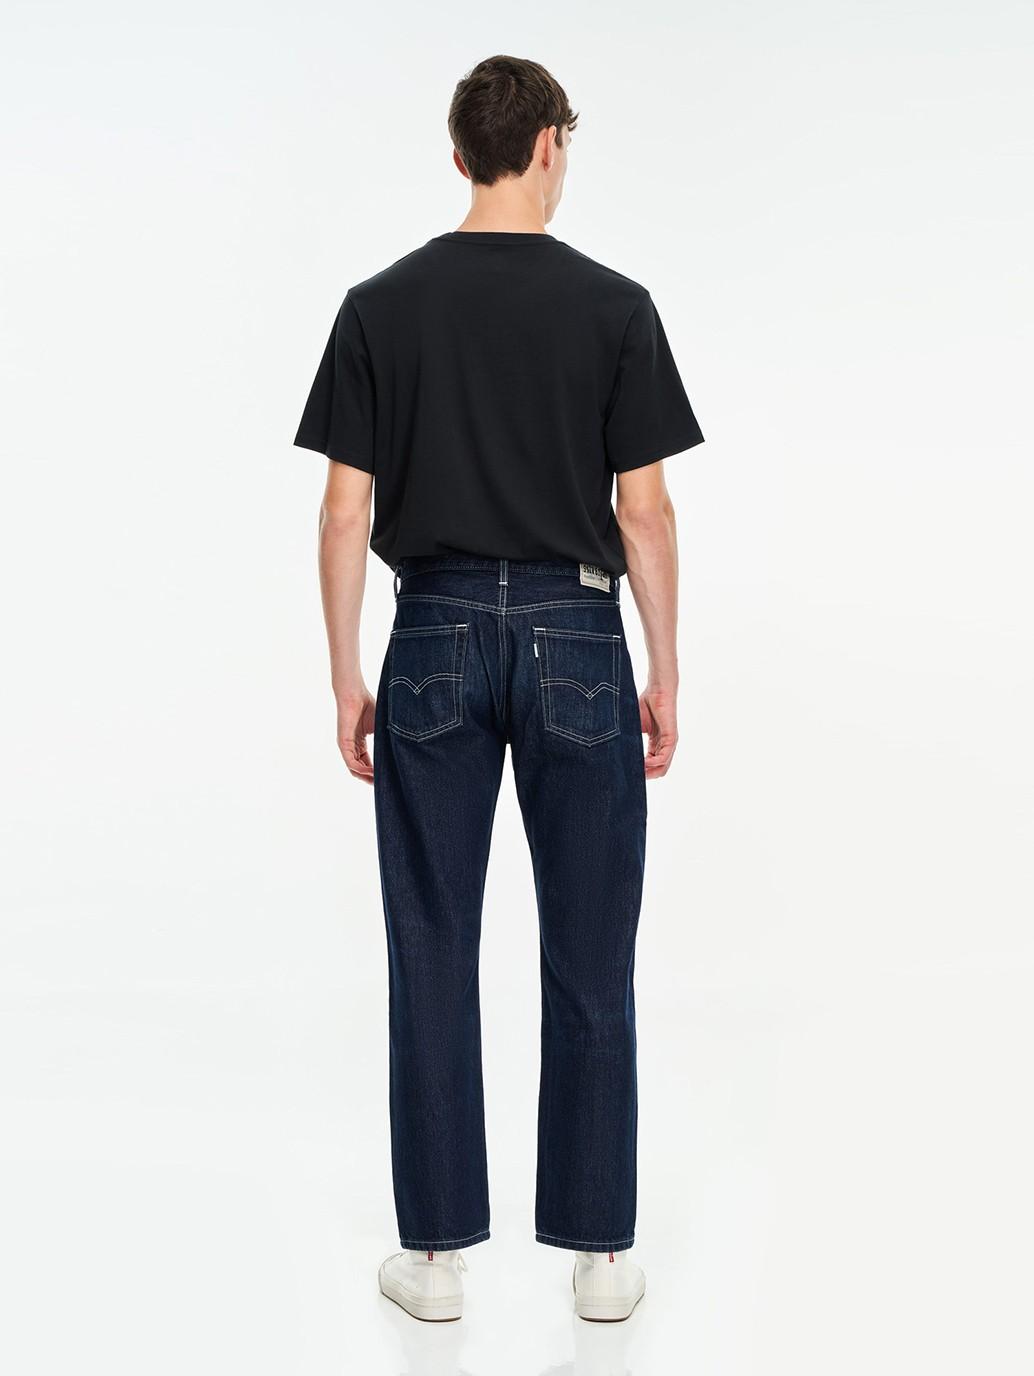 Buy Levi's® Men's SilverTab™ Straight Jeans | Levi’s® Official Online ...